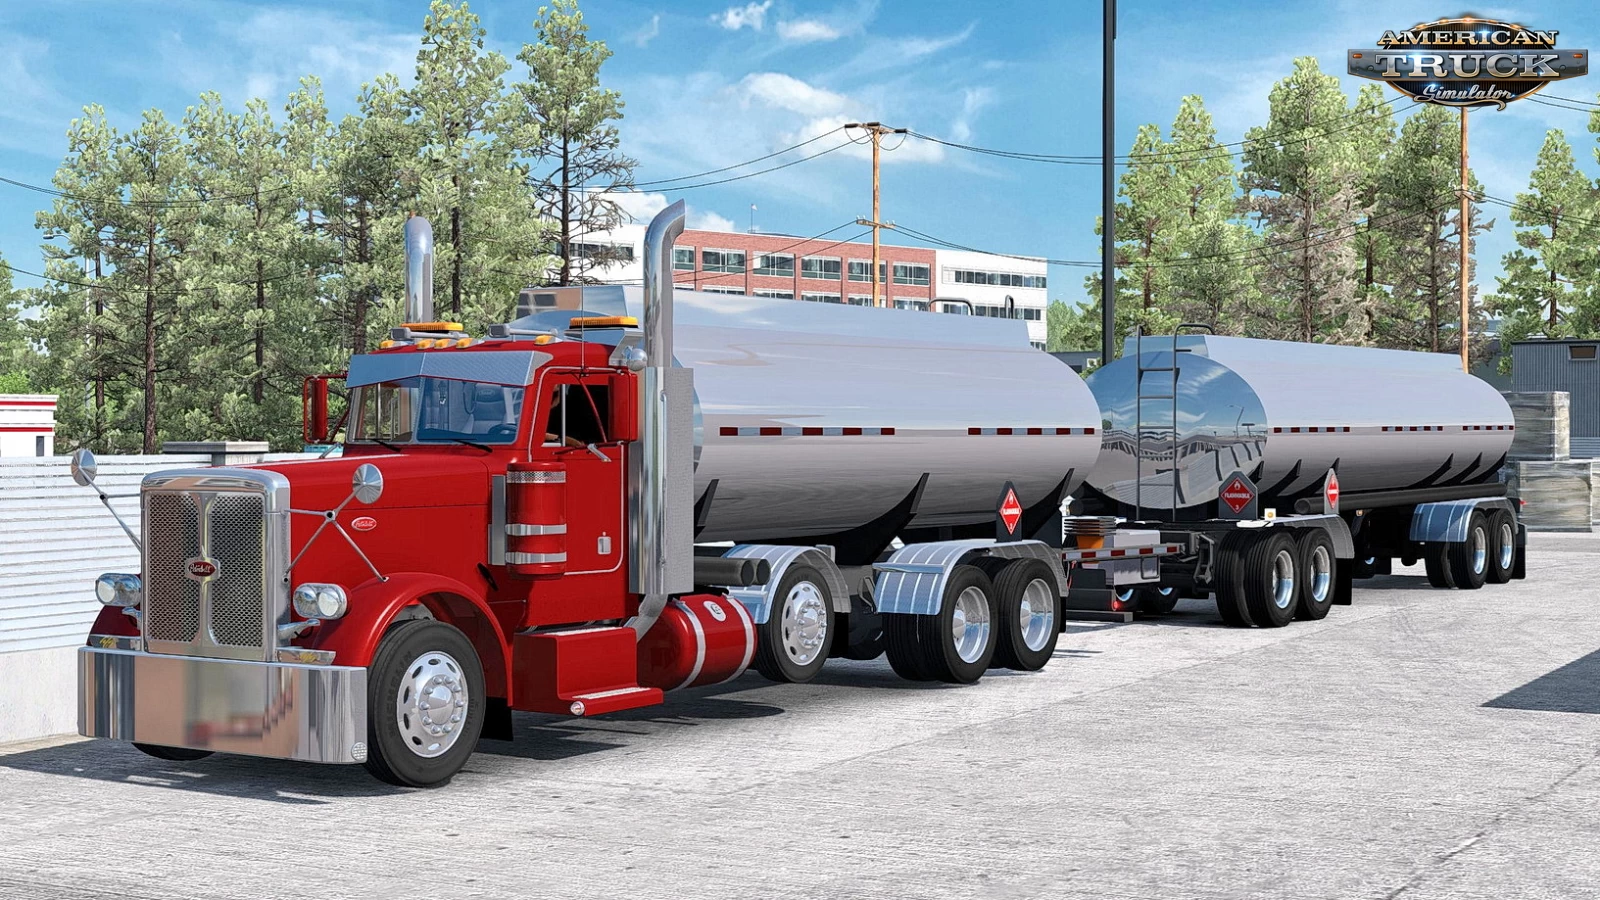 Project 3XX Heavy Truck and Trailer Addon v3.6 (1.47.x)